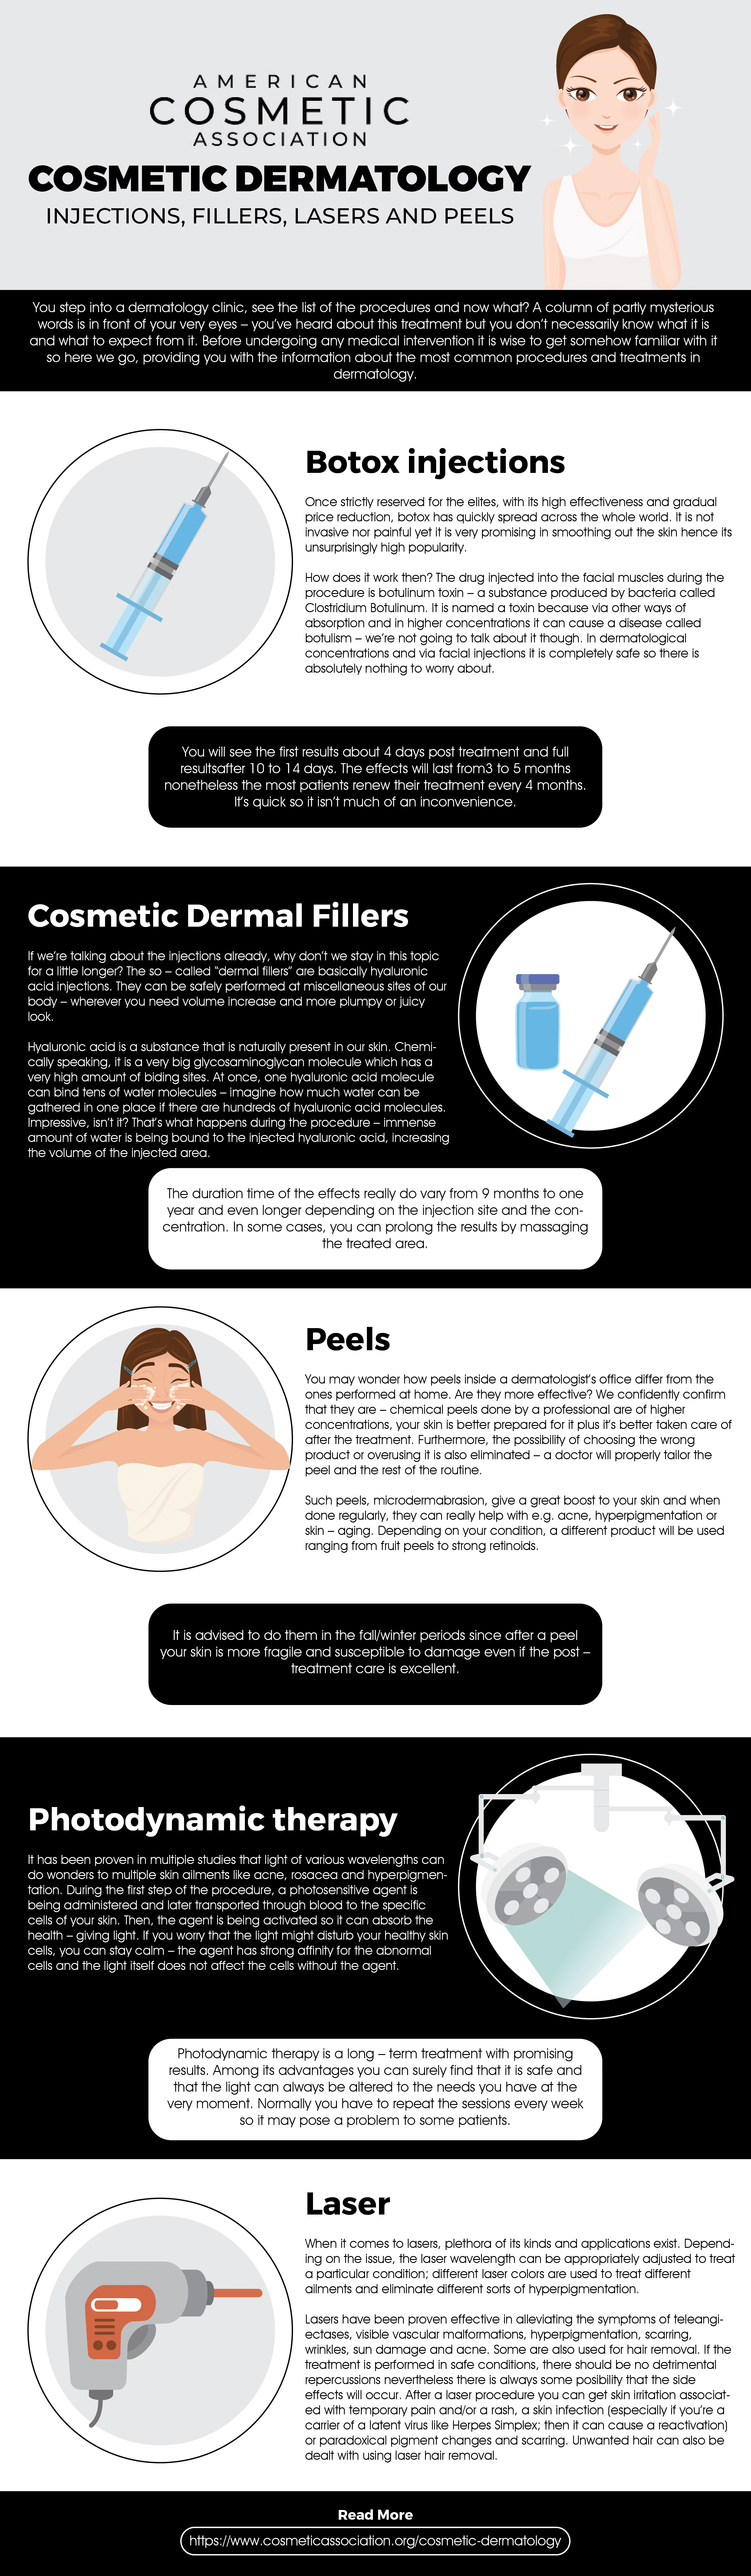 COSMETIC DERMATOLOGY-Injections-fillers lasers and peels infographic